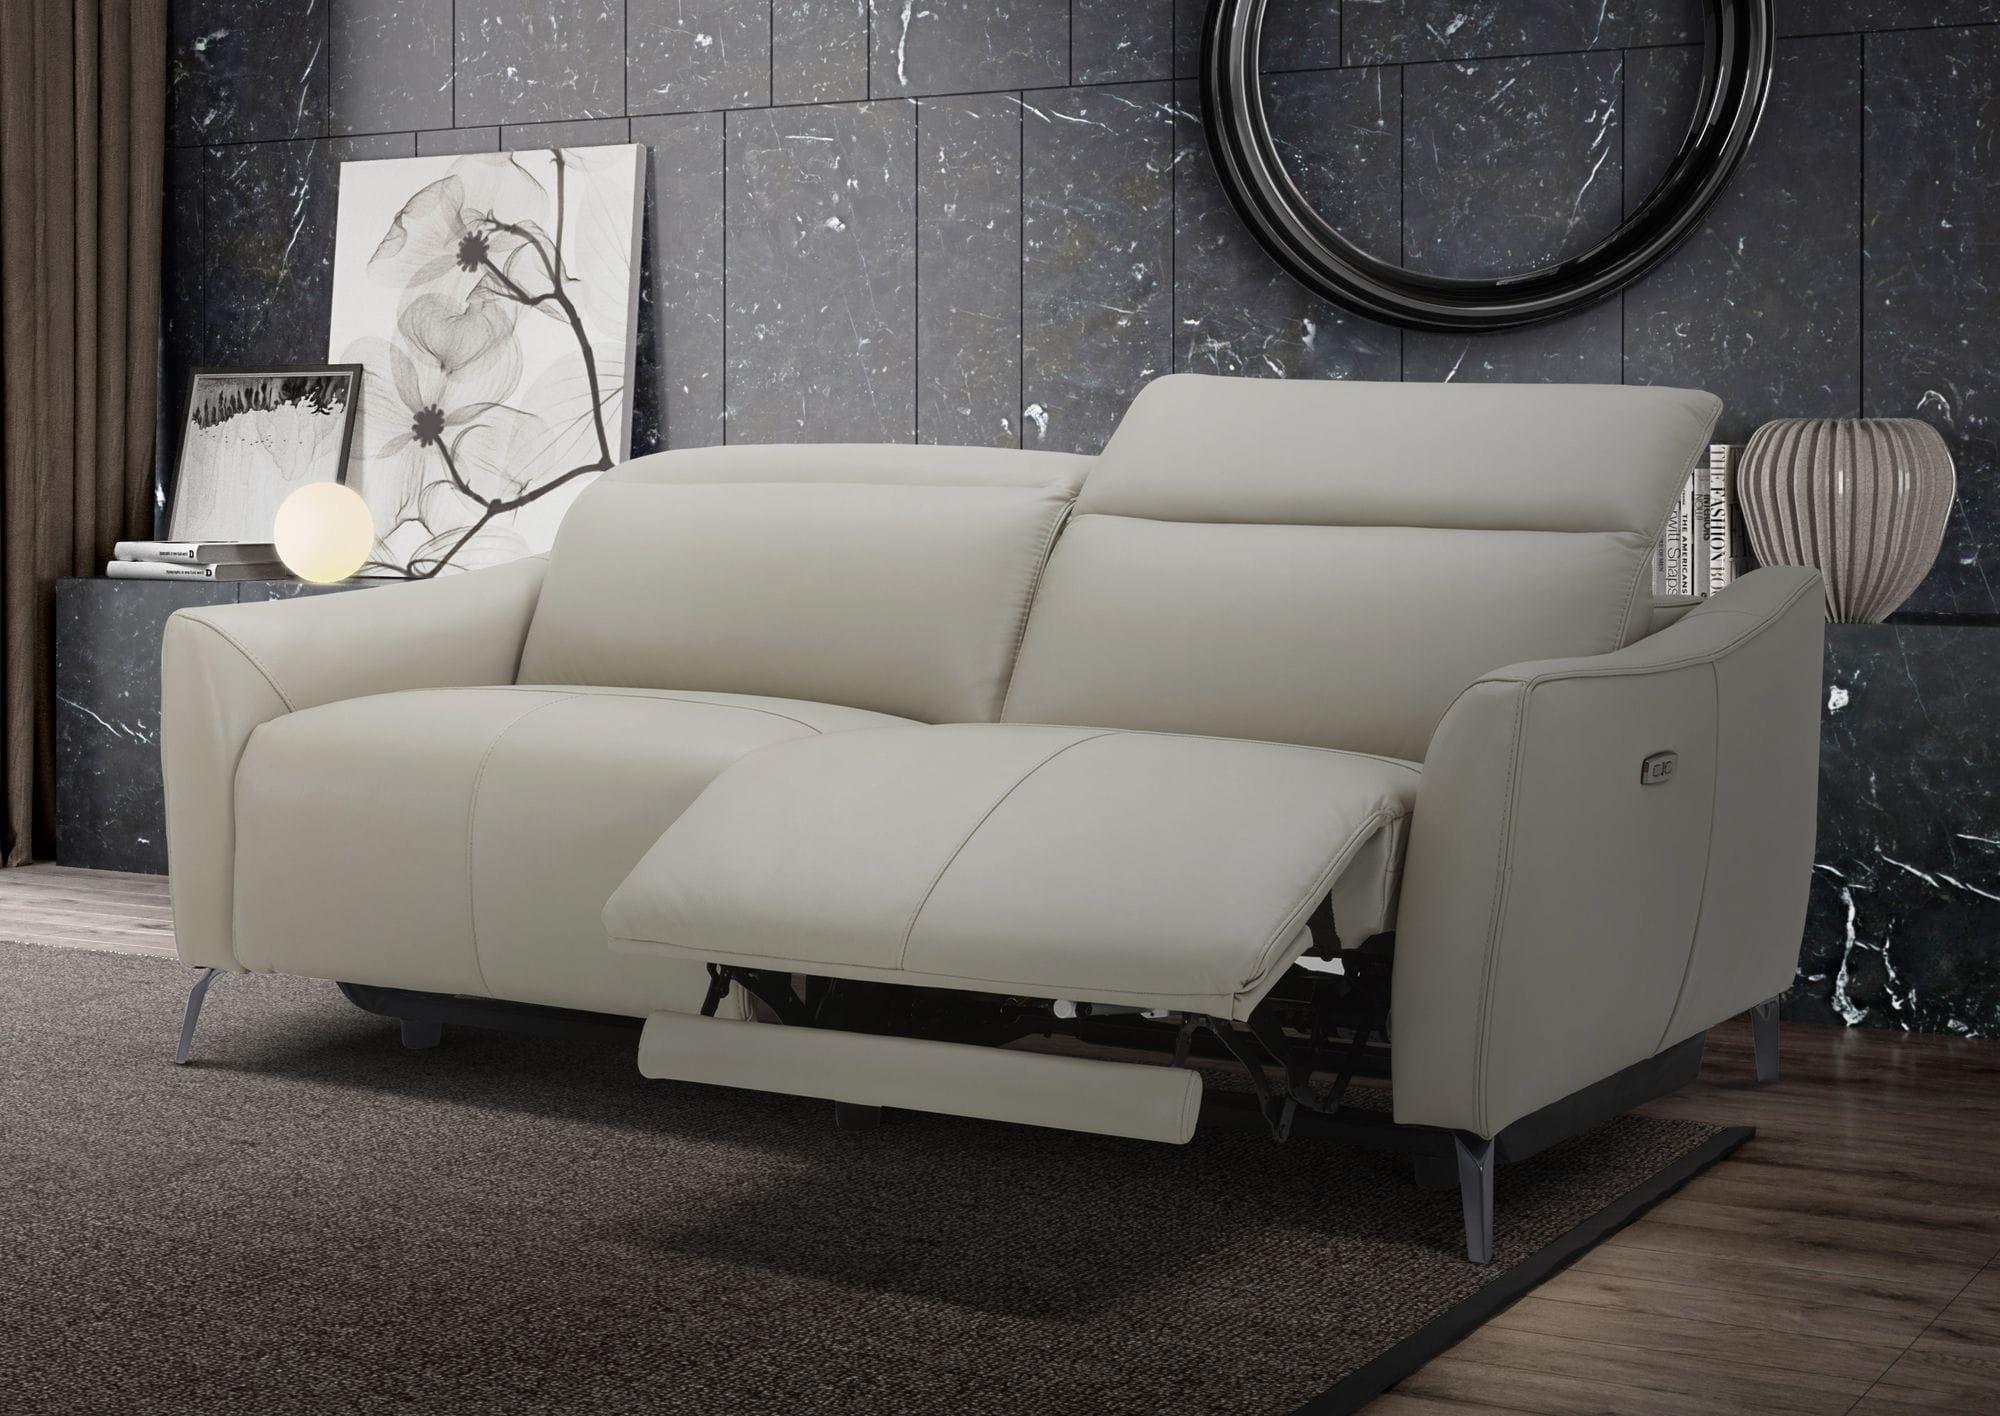 Contemporary, Modern Recliner Sofa VGKMKM.381H-DK-GRY-S VGKMKM.381H-DK-GRY-S in Light Grey Genuine Leather